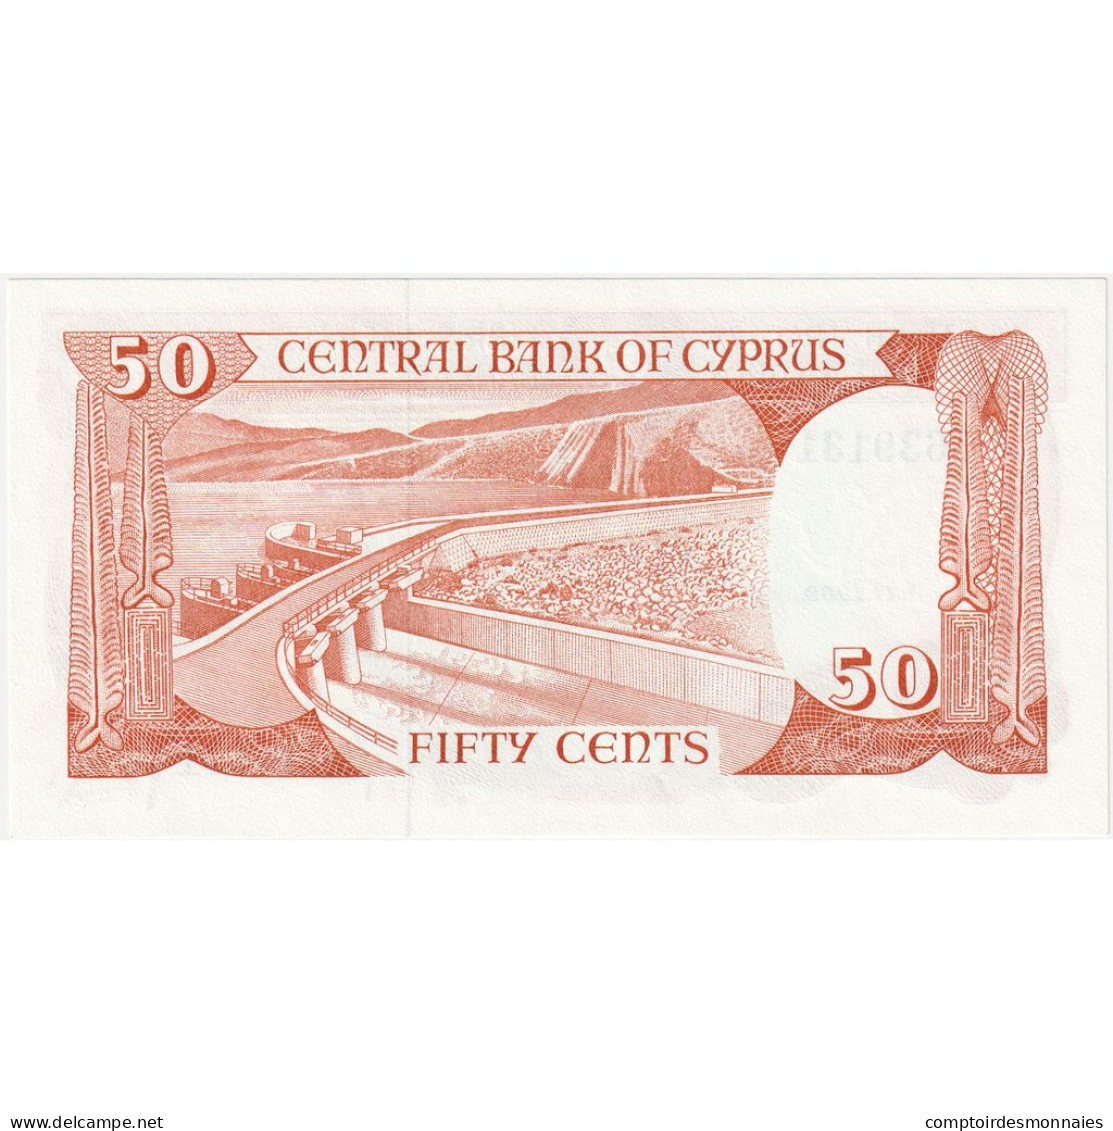 Chypre, 50 Cents, 1989-11-01, NEUF - Cipro